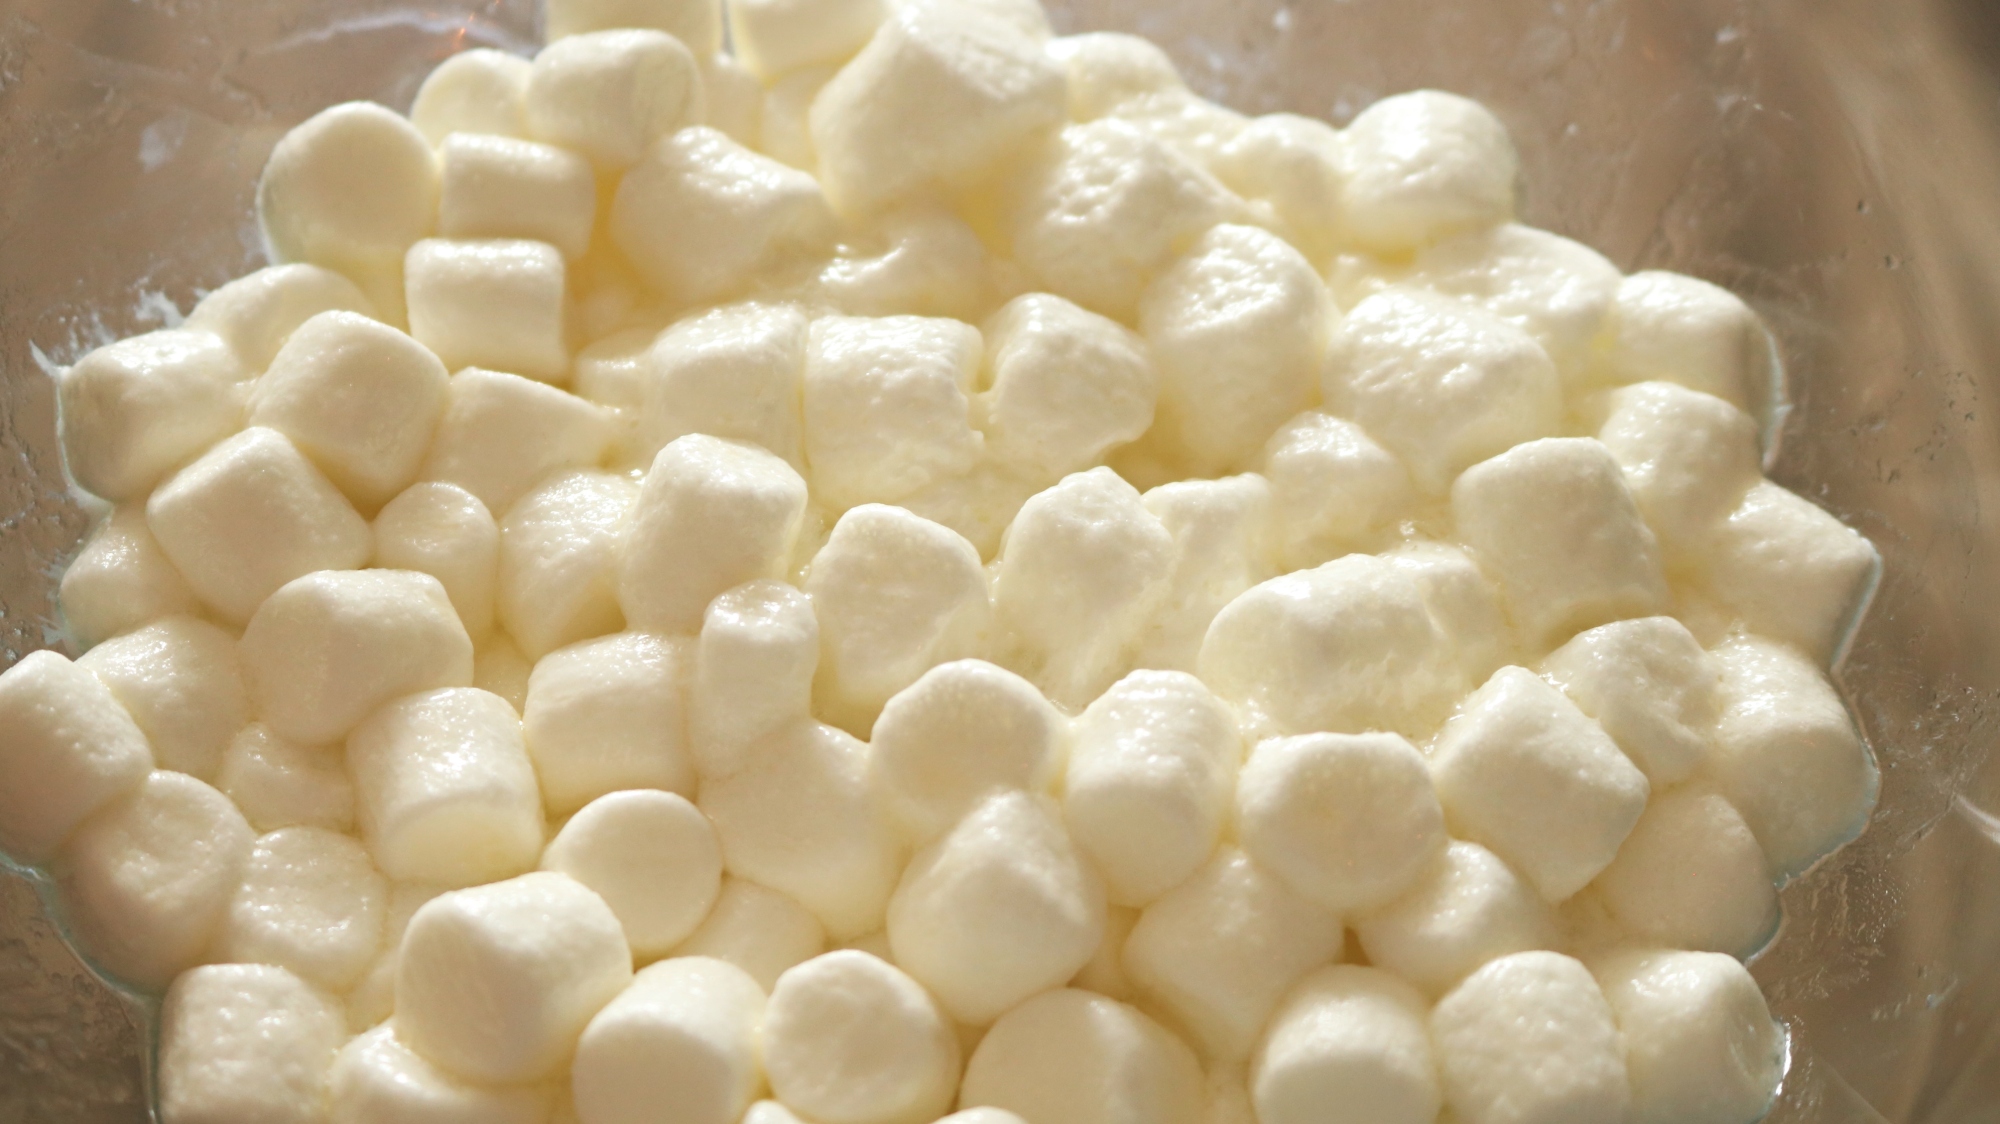 Mini marshmallows tossed with butter in a clear bowl.